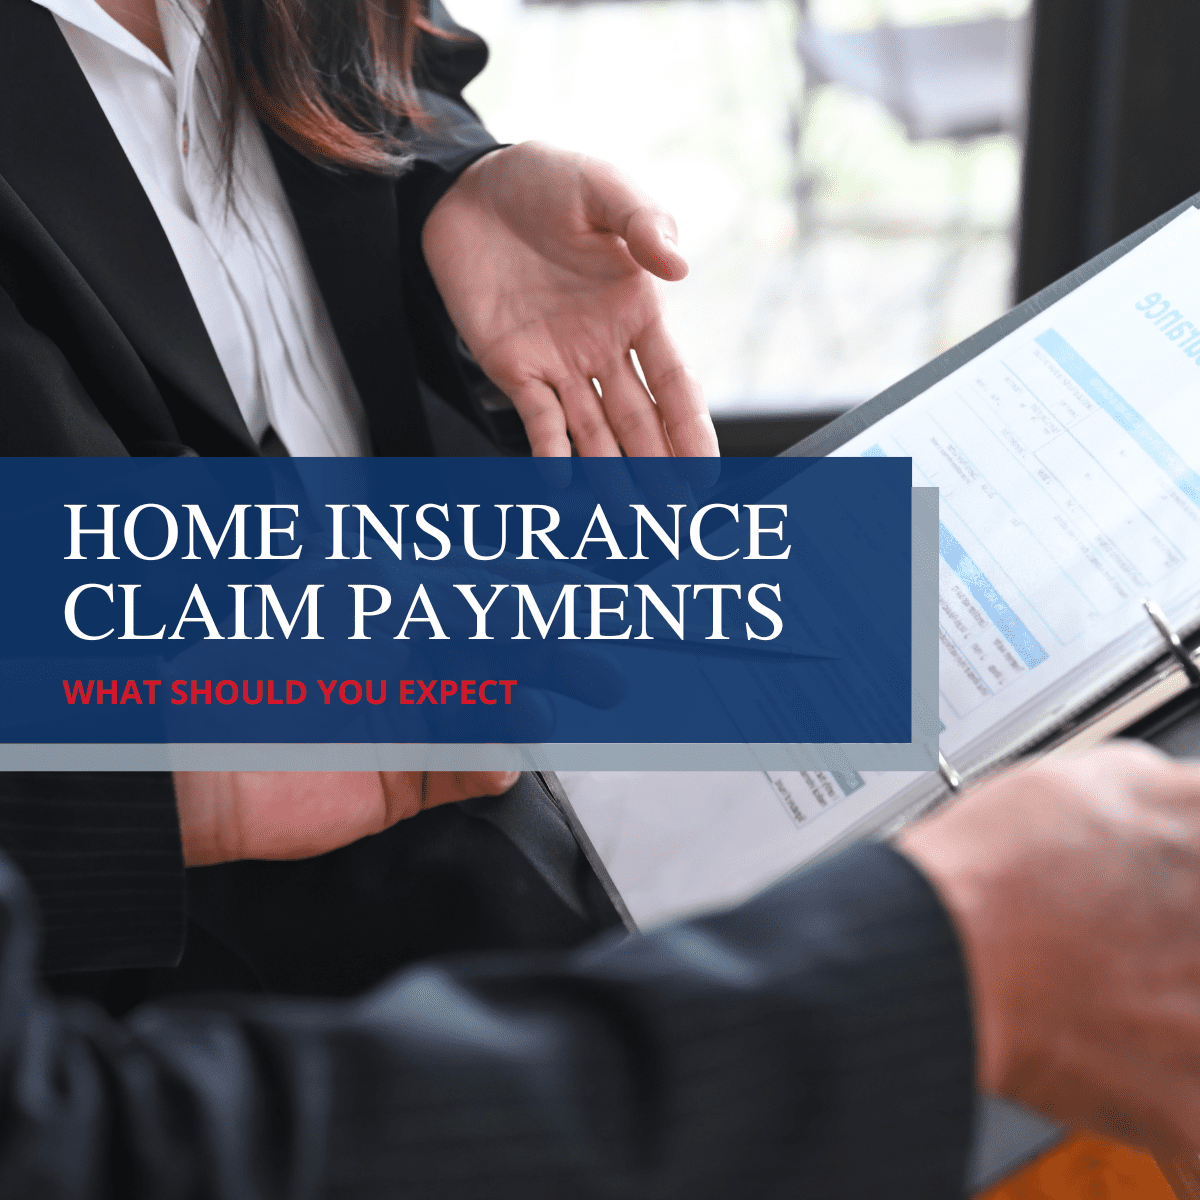 How Do Home Insurance Claim Payments Work?